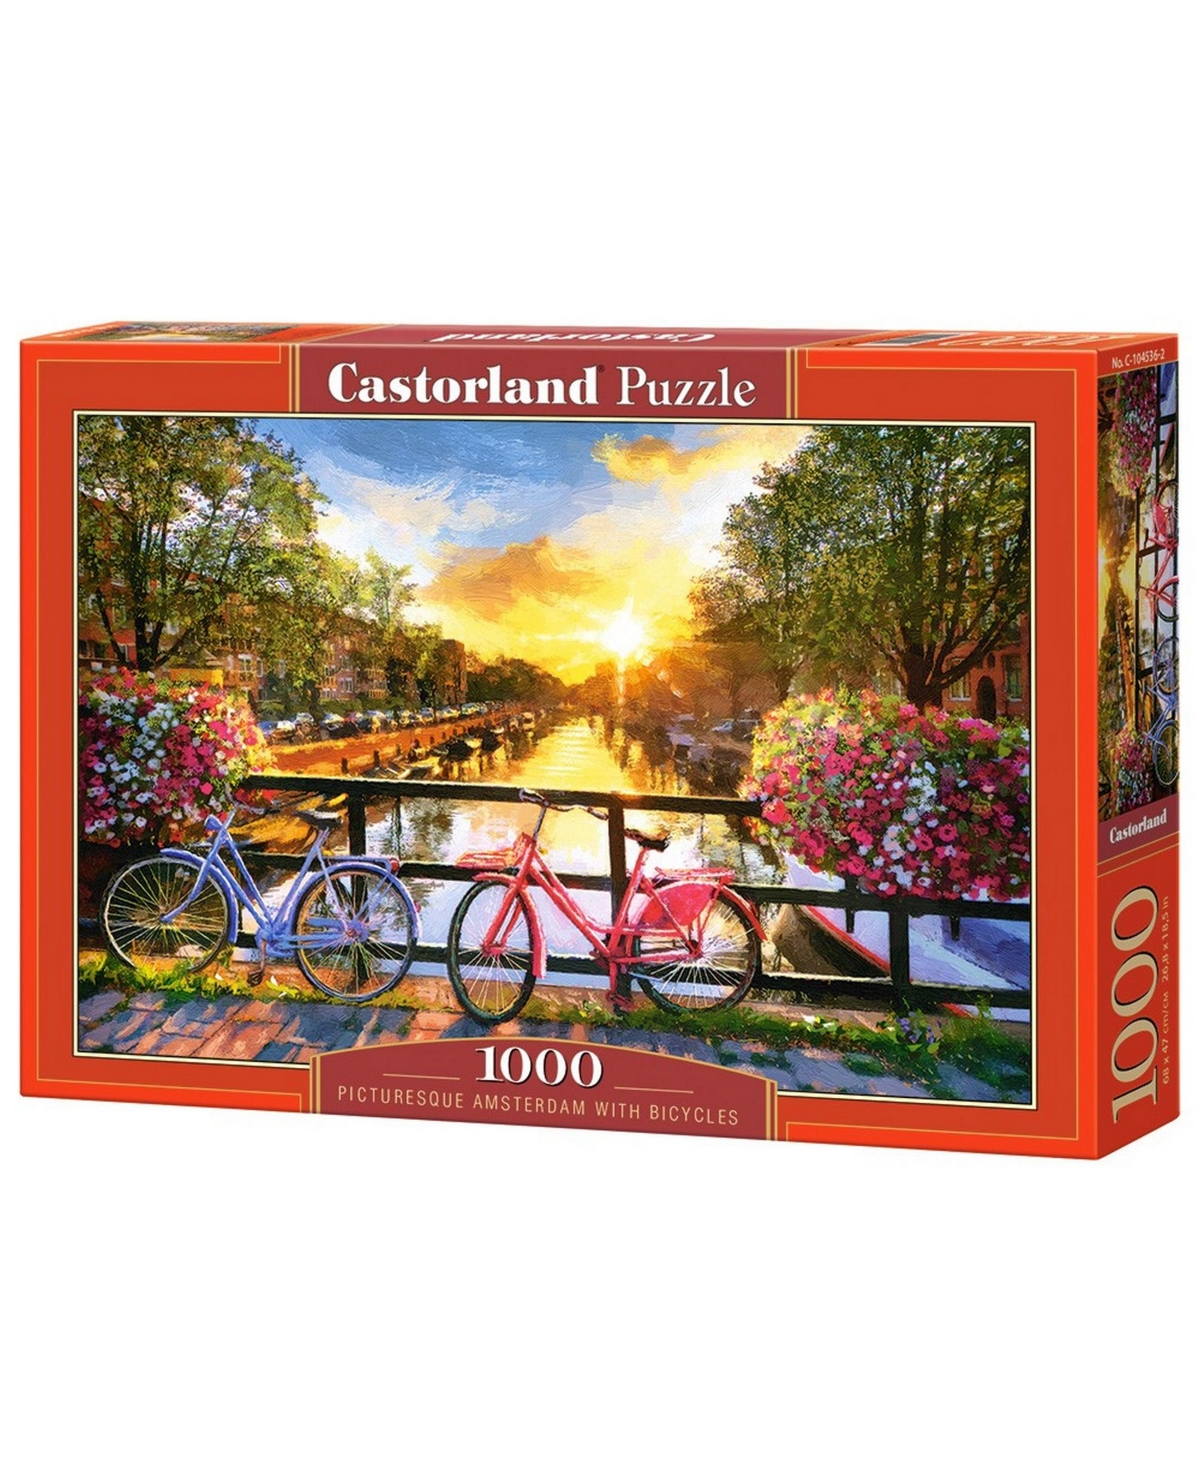 Castorland Picturesque Amsterdam With Bicycles Jigsaw Puzzle Set, 1000 Piece In Multicolor